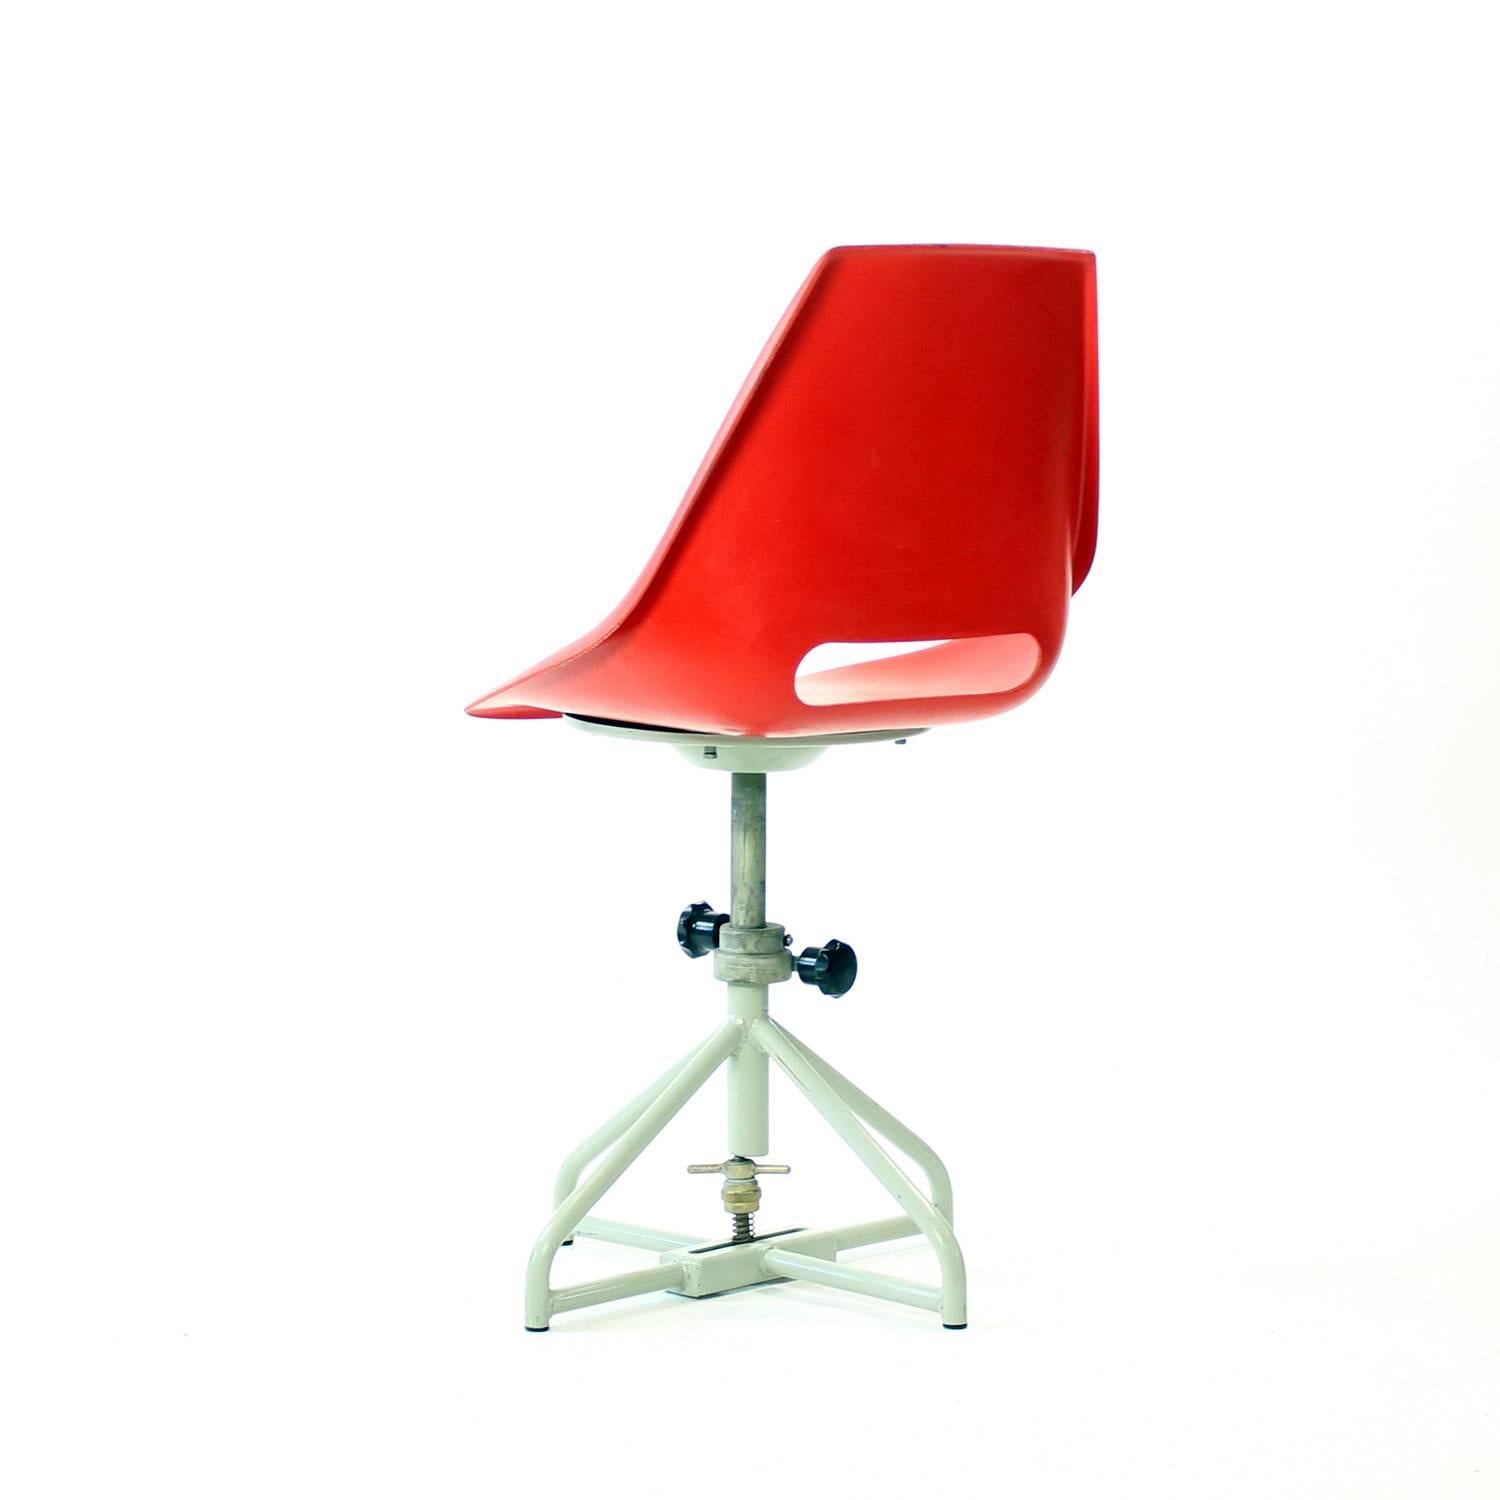 Original Vertex Chairs by Miroslav Navratil, circa 1960 In Good Condition For Sale In Zohor, SK